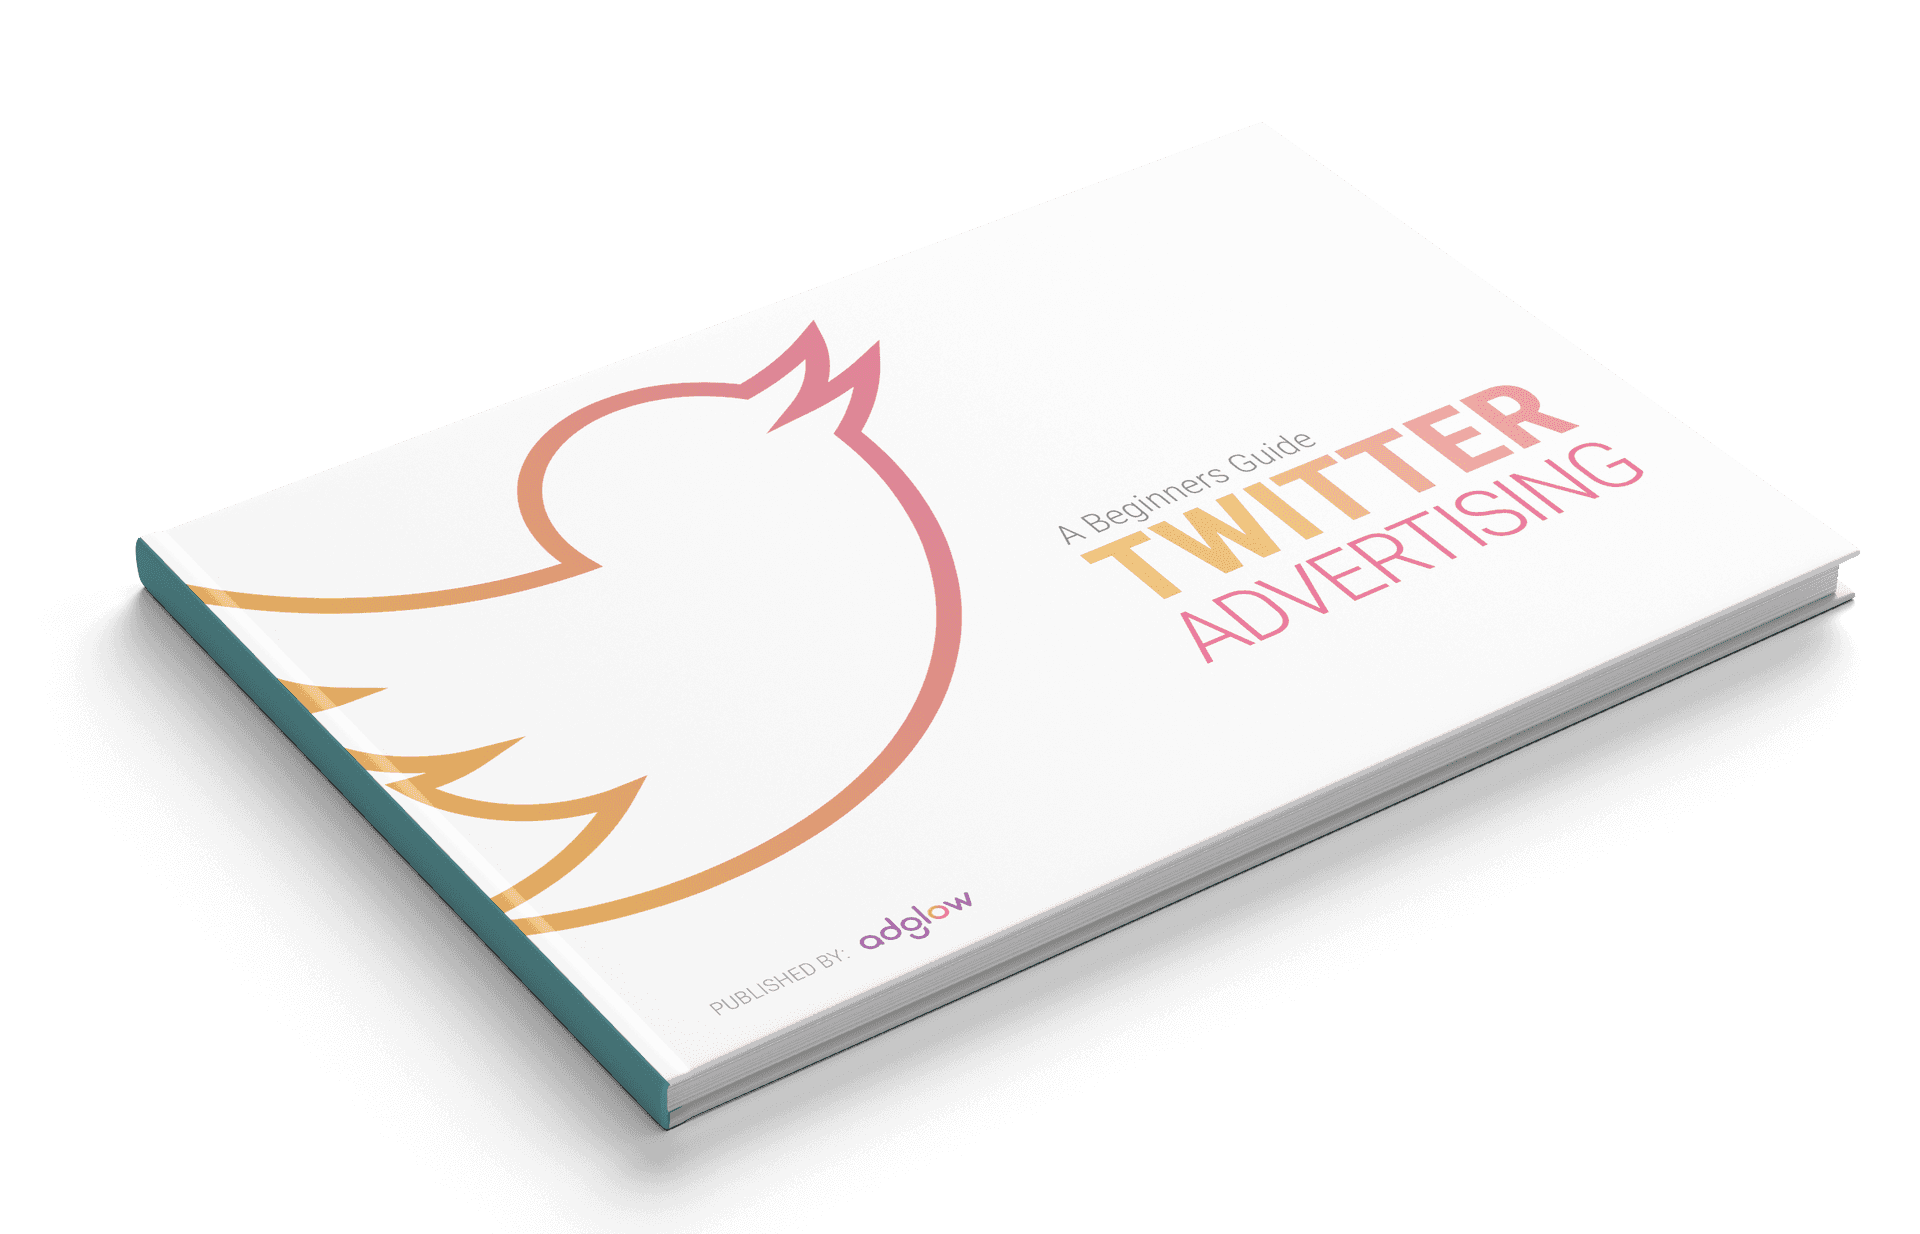 Twitter Advertising Guide Book Cover PNG image